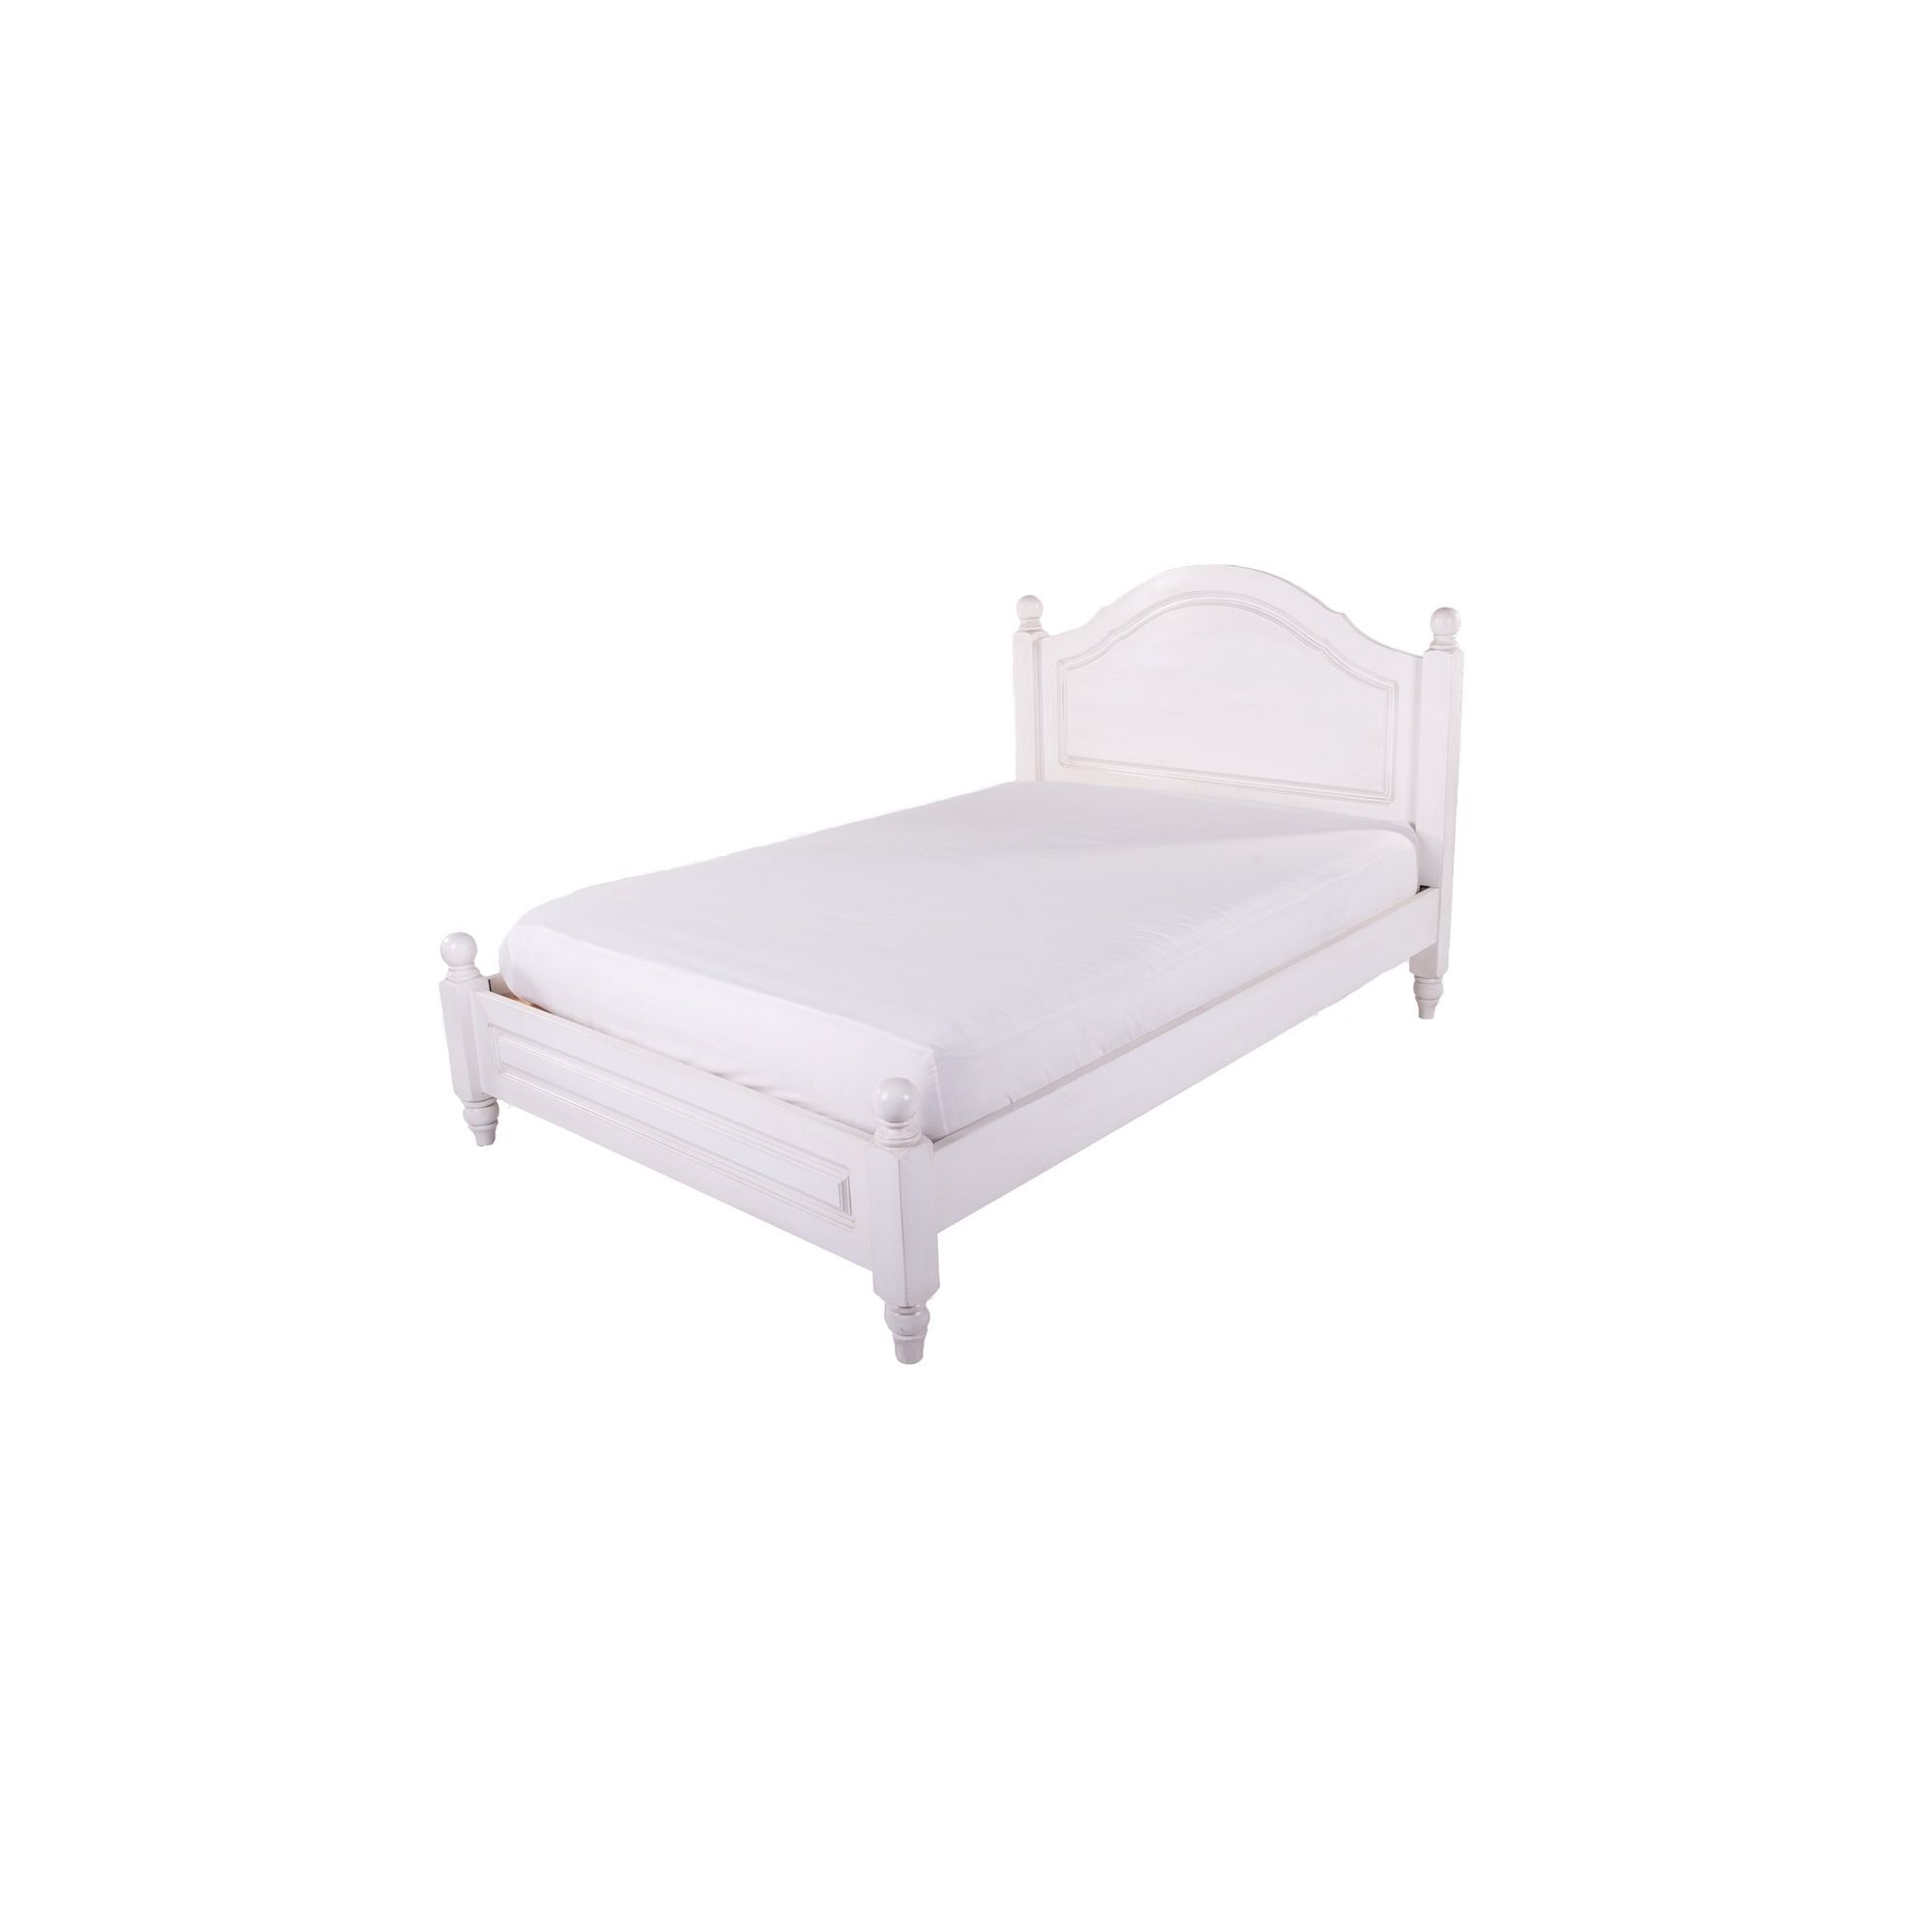 Thorndon Brittany Bed Frame - King at Tesco Direct